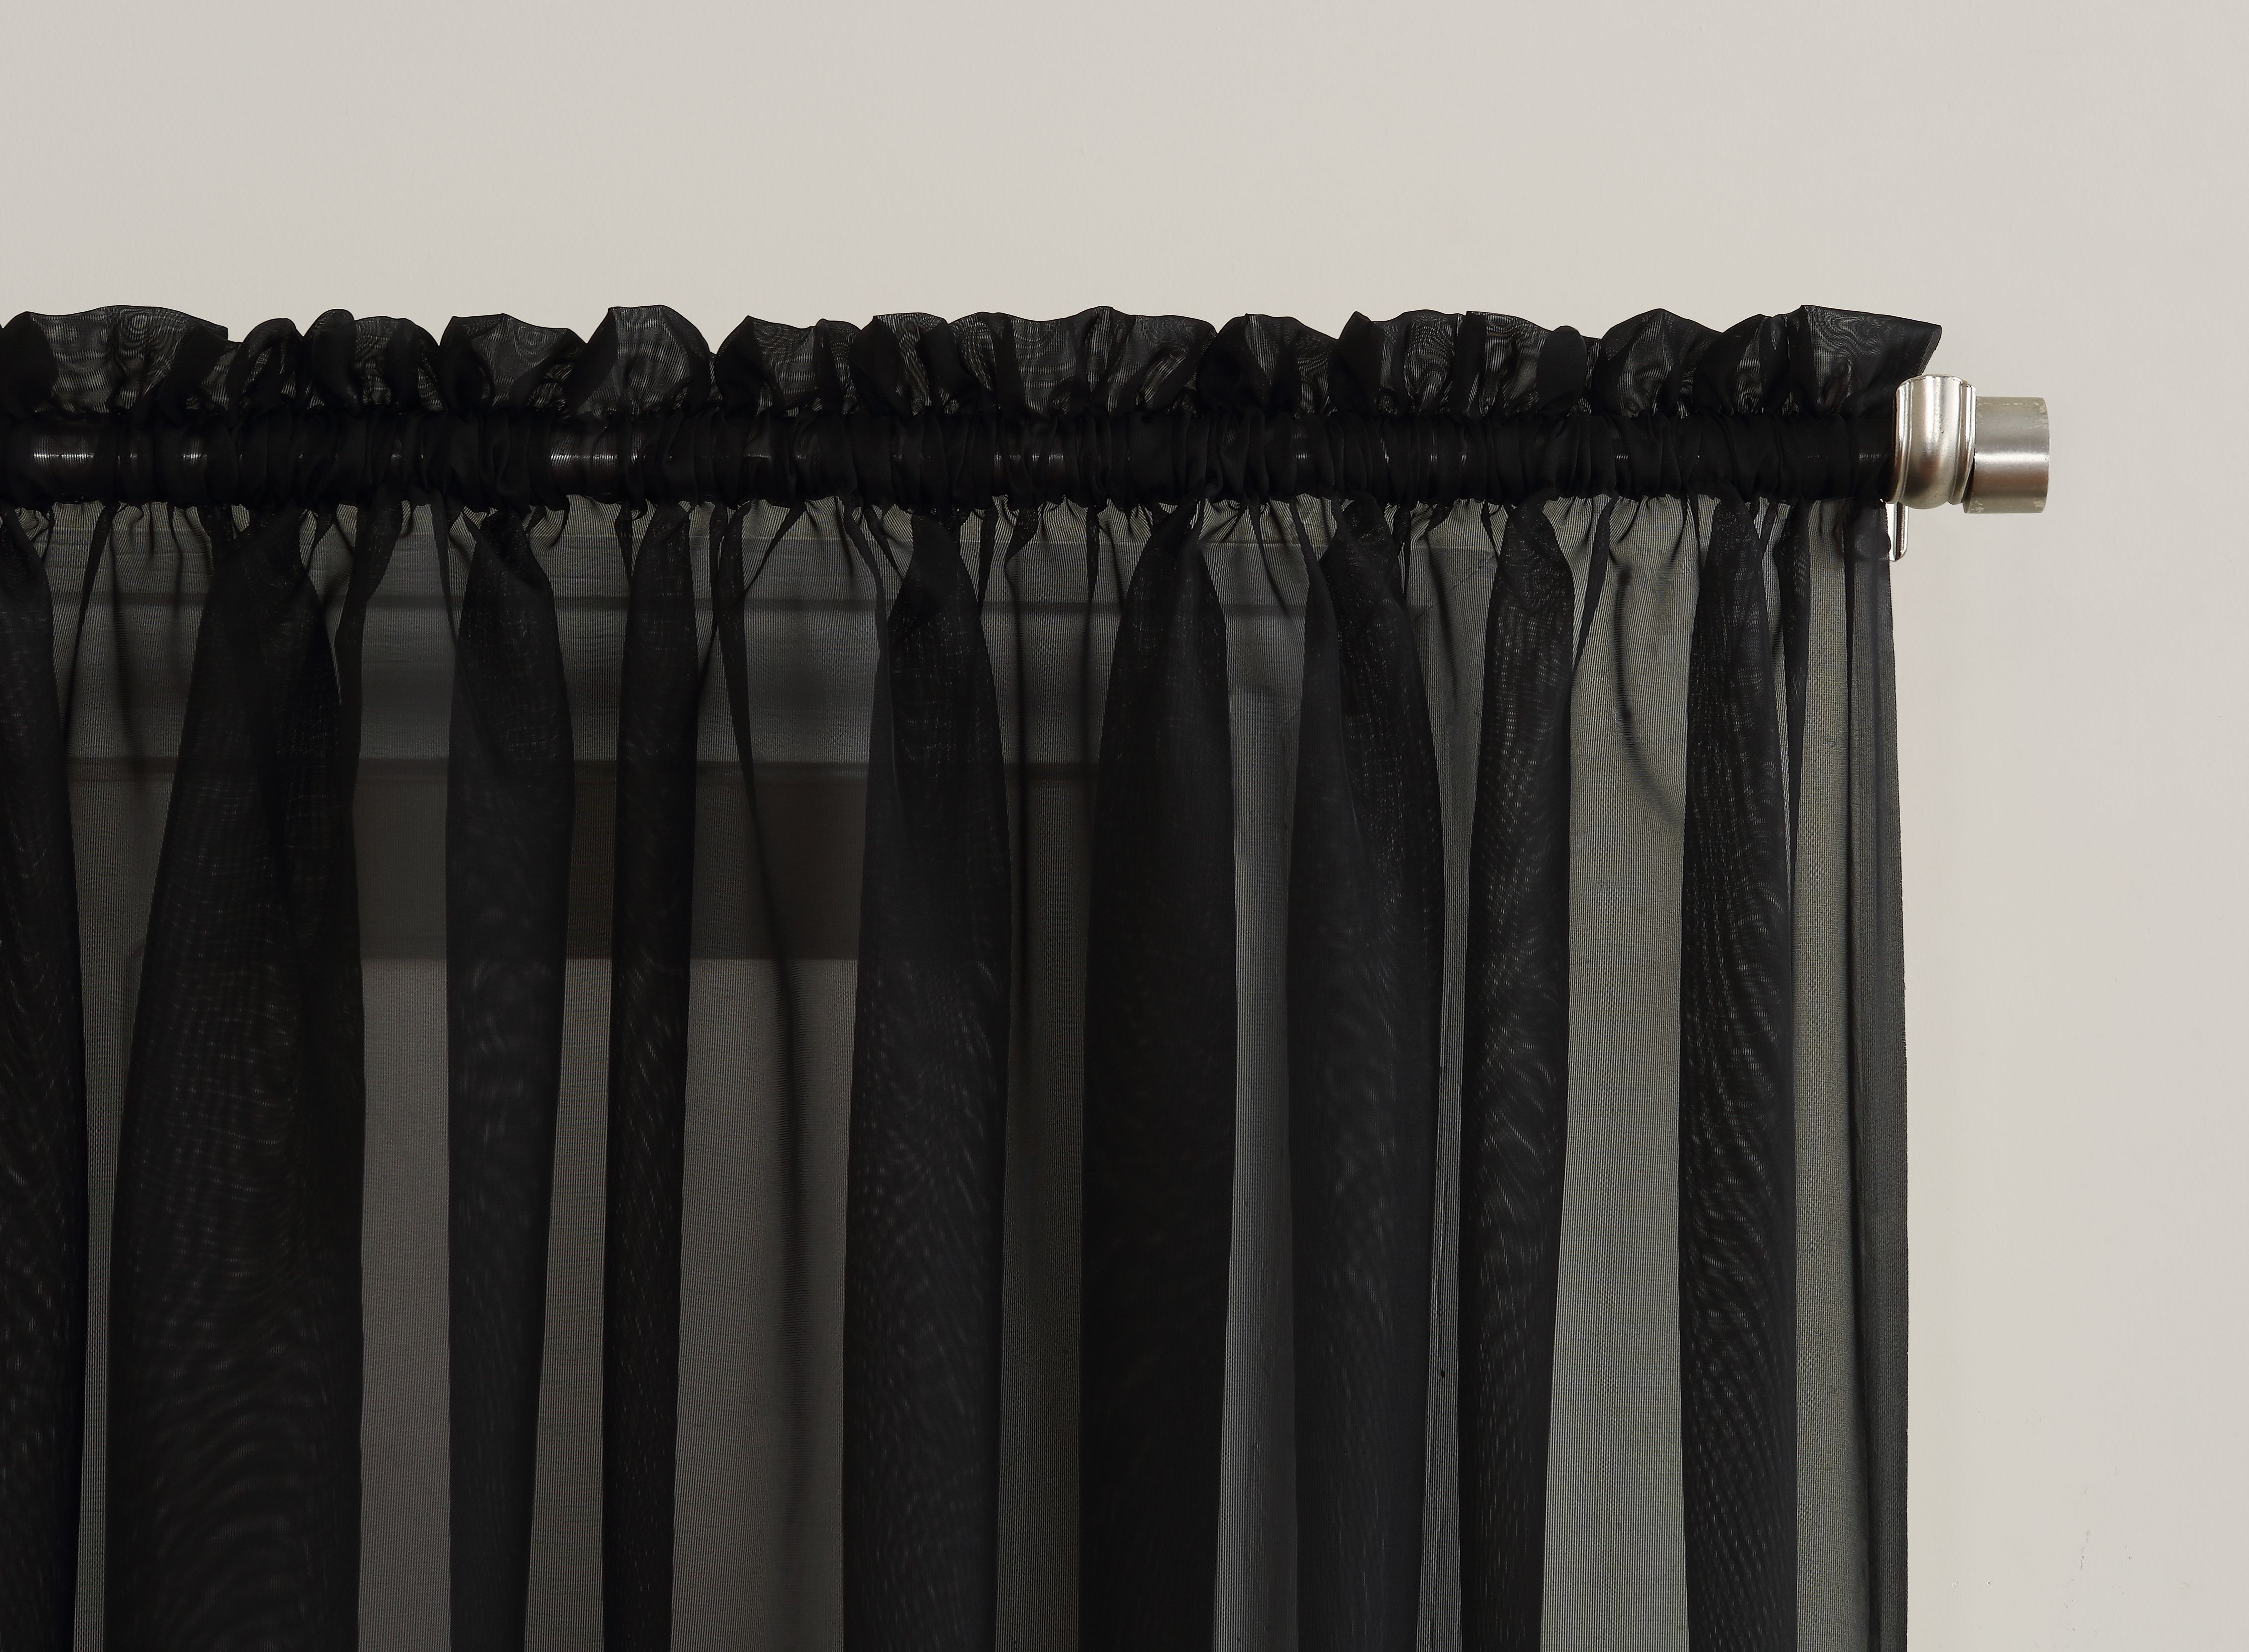 No. 918 Emily Sheer Voile Rod Pocket Curtain Panel Regarding Emily Sheer Voile Single Curtain Panels (Photo 6 of 20)